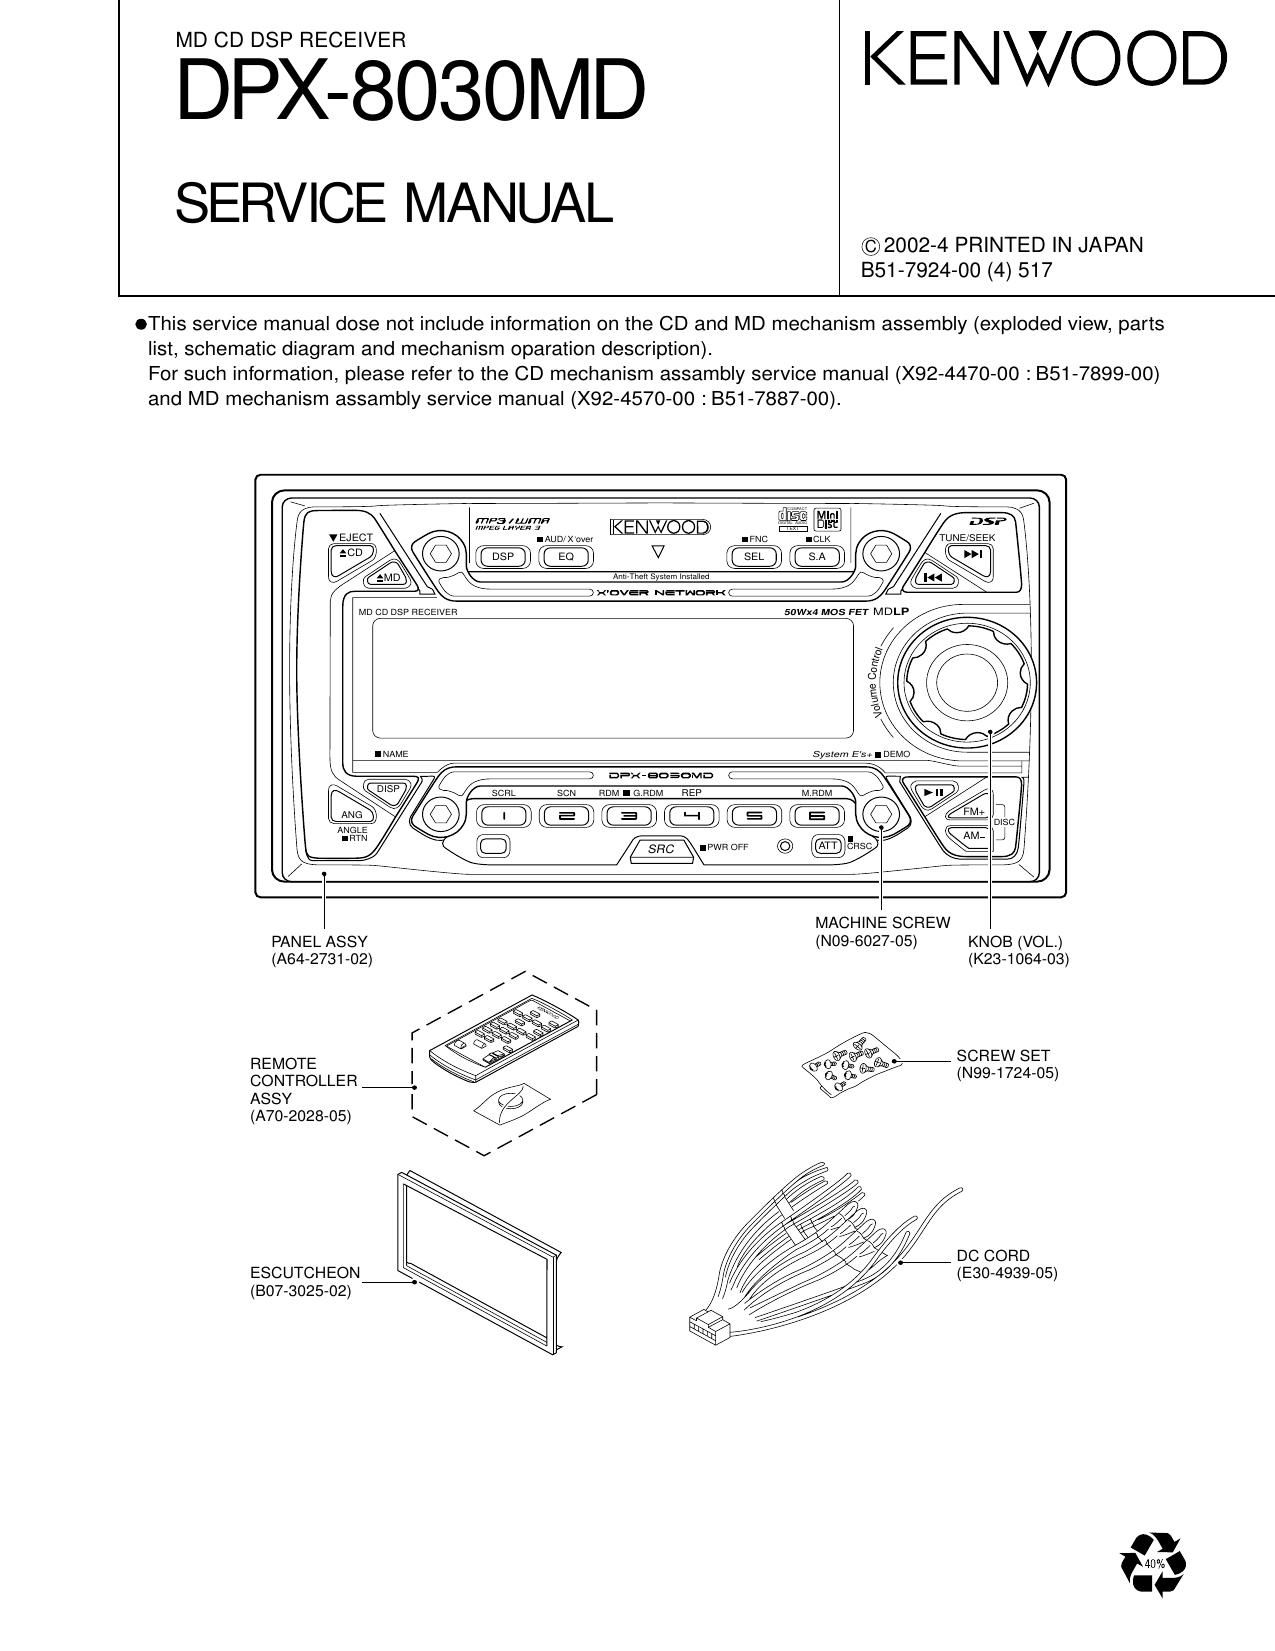 Kenwood DPX 8030 MD Service Manual